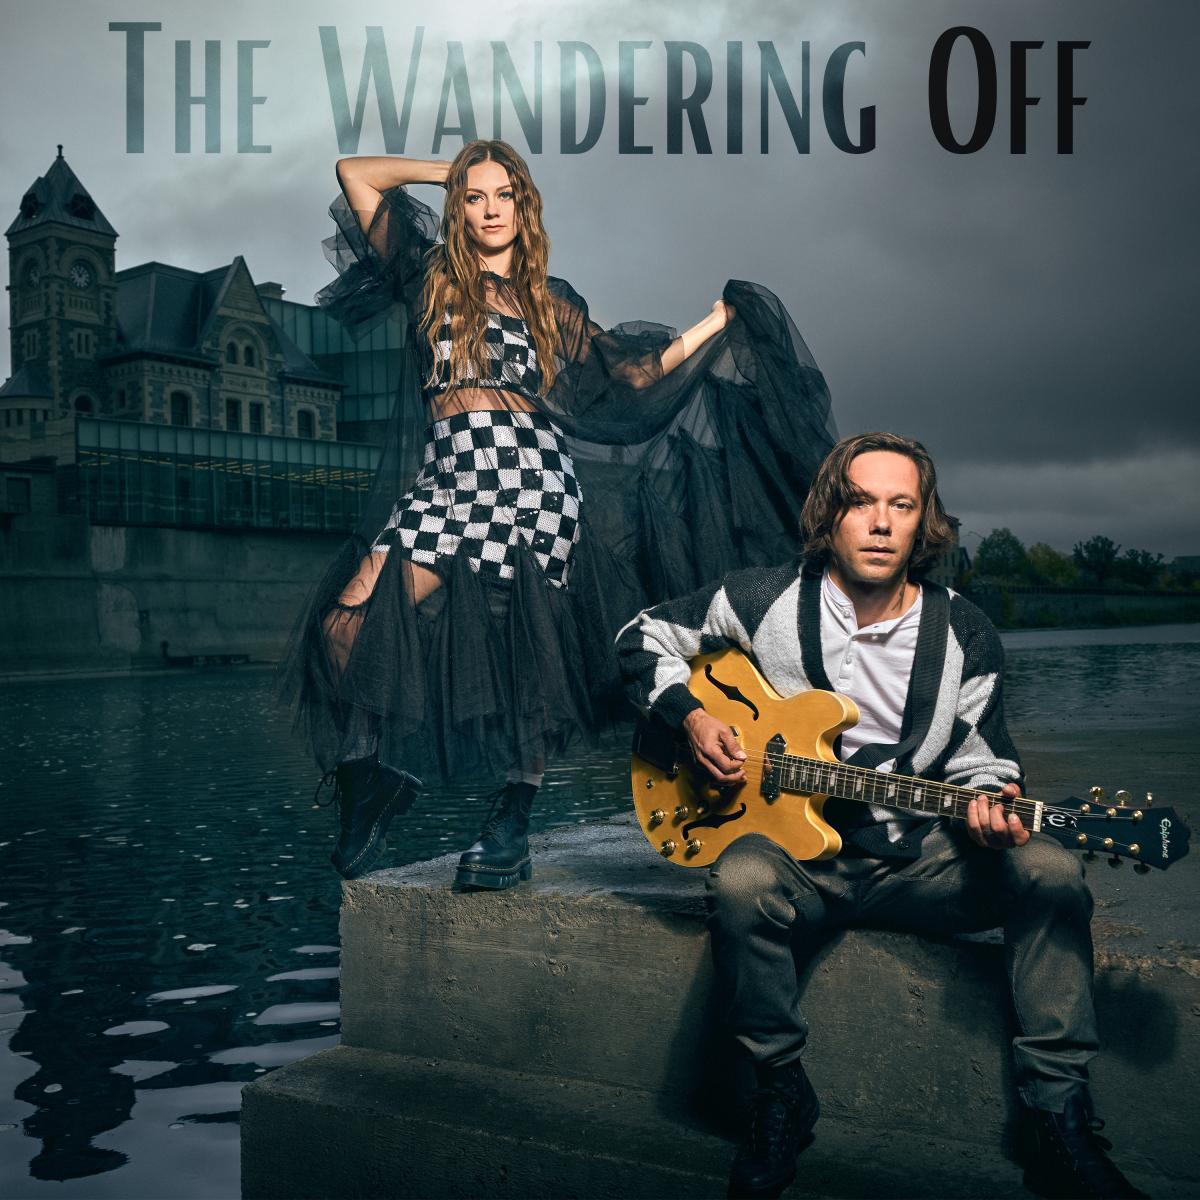 The Wandering Off